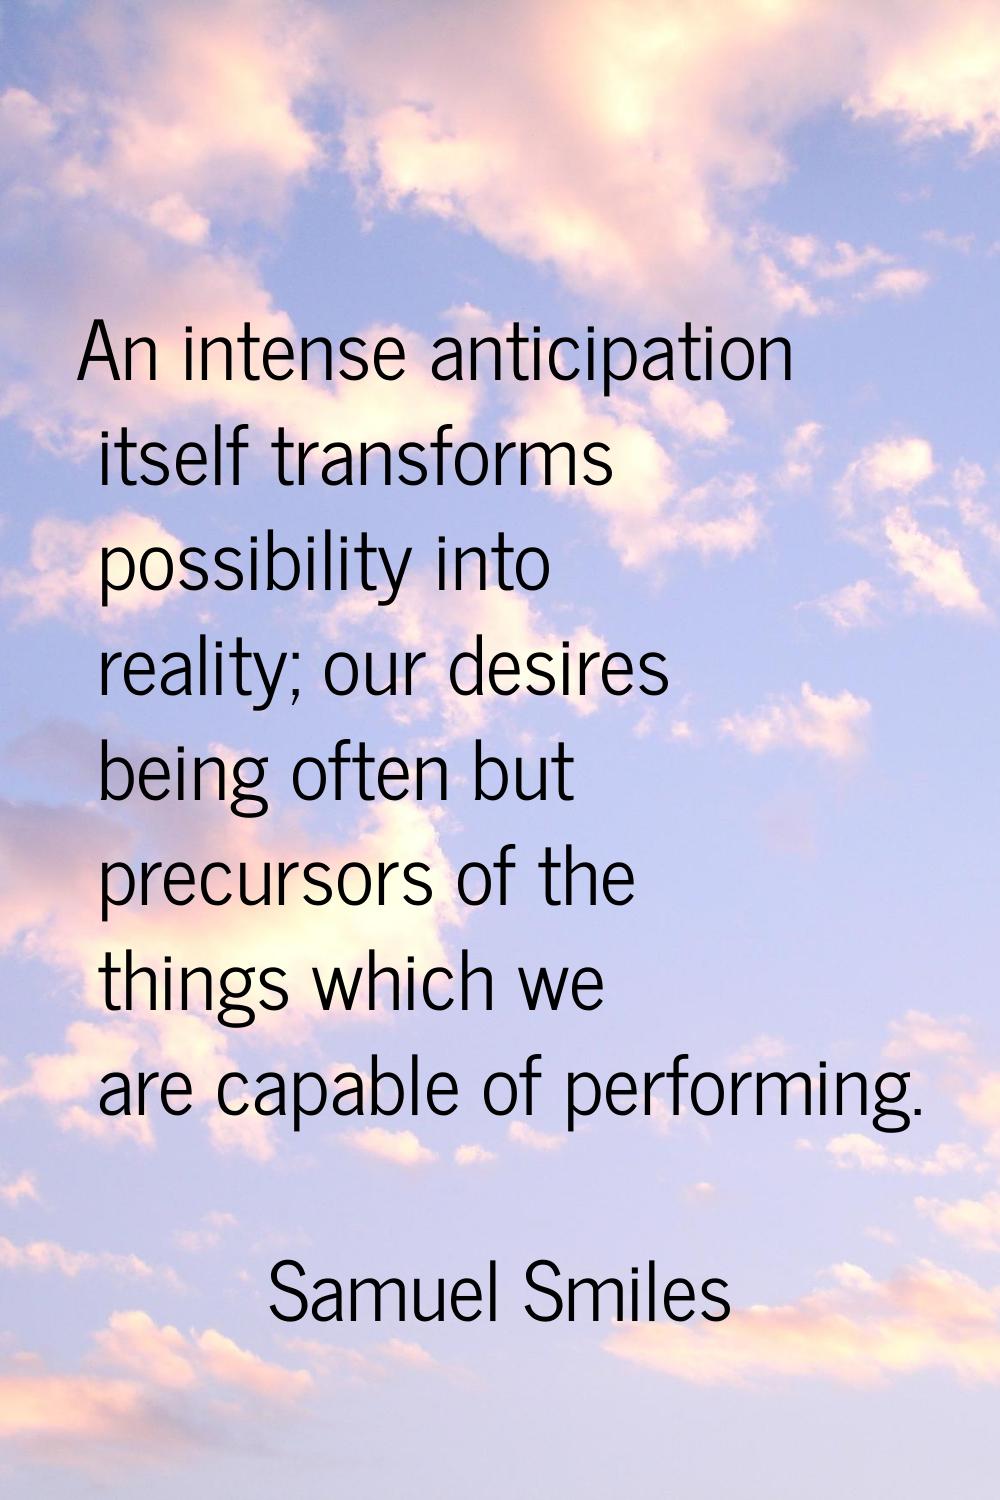 An intense anticipation itself transforms possibility into reality; our desires being often but pre